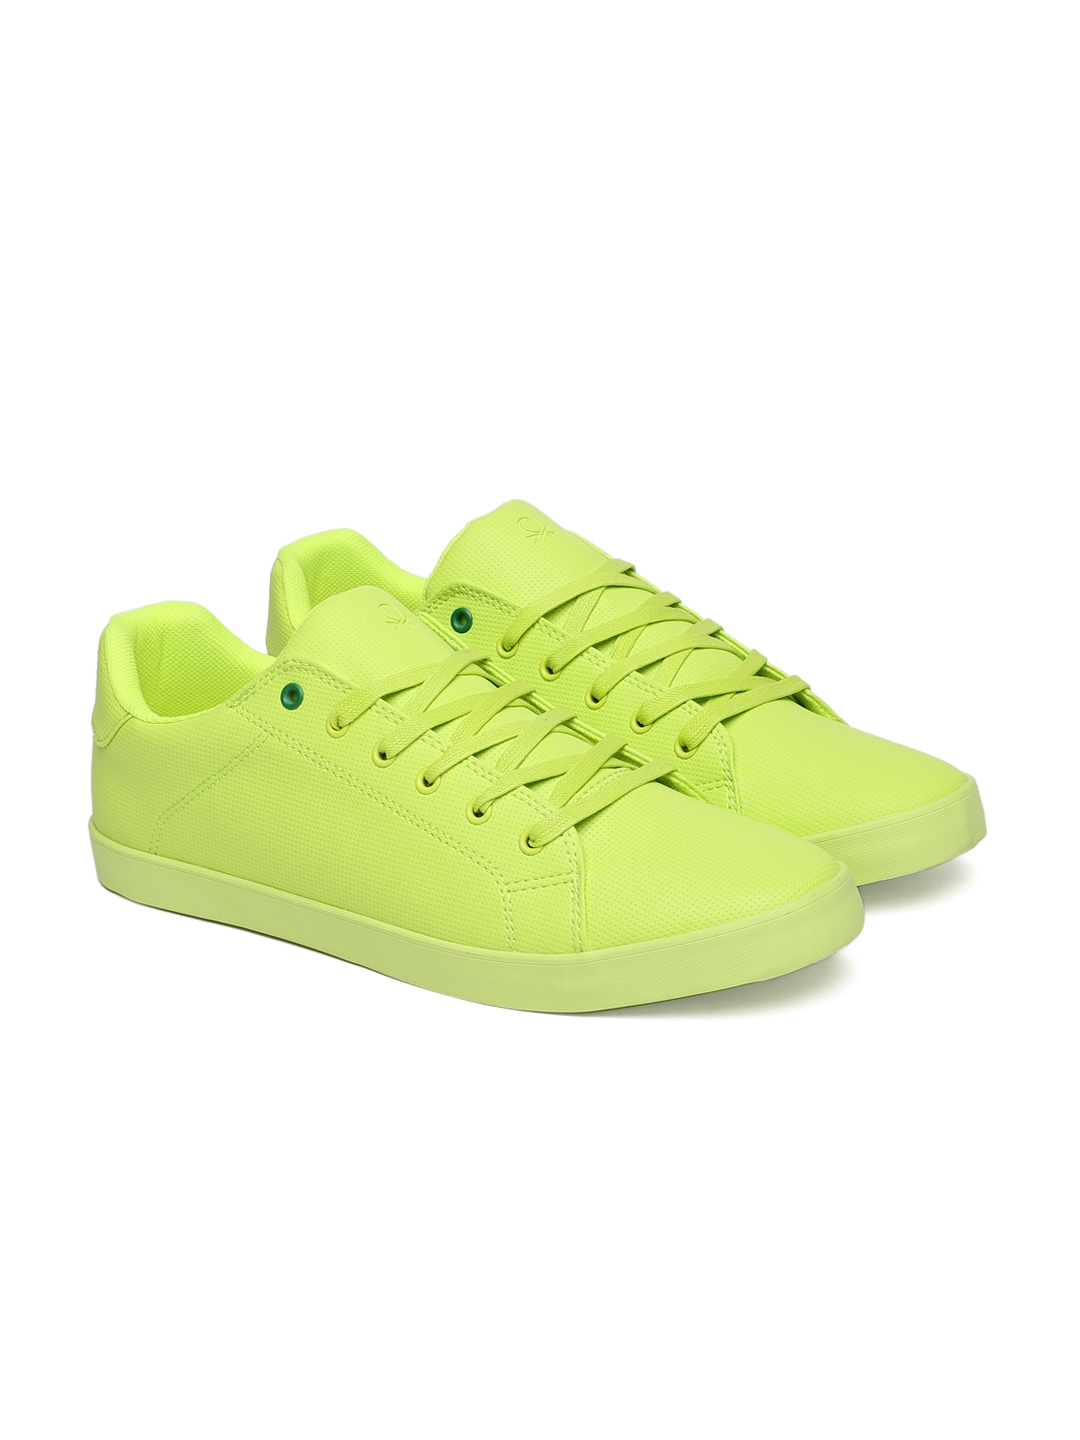 lime green gym shoes